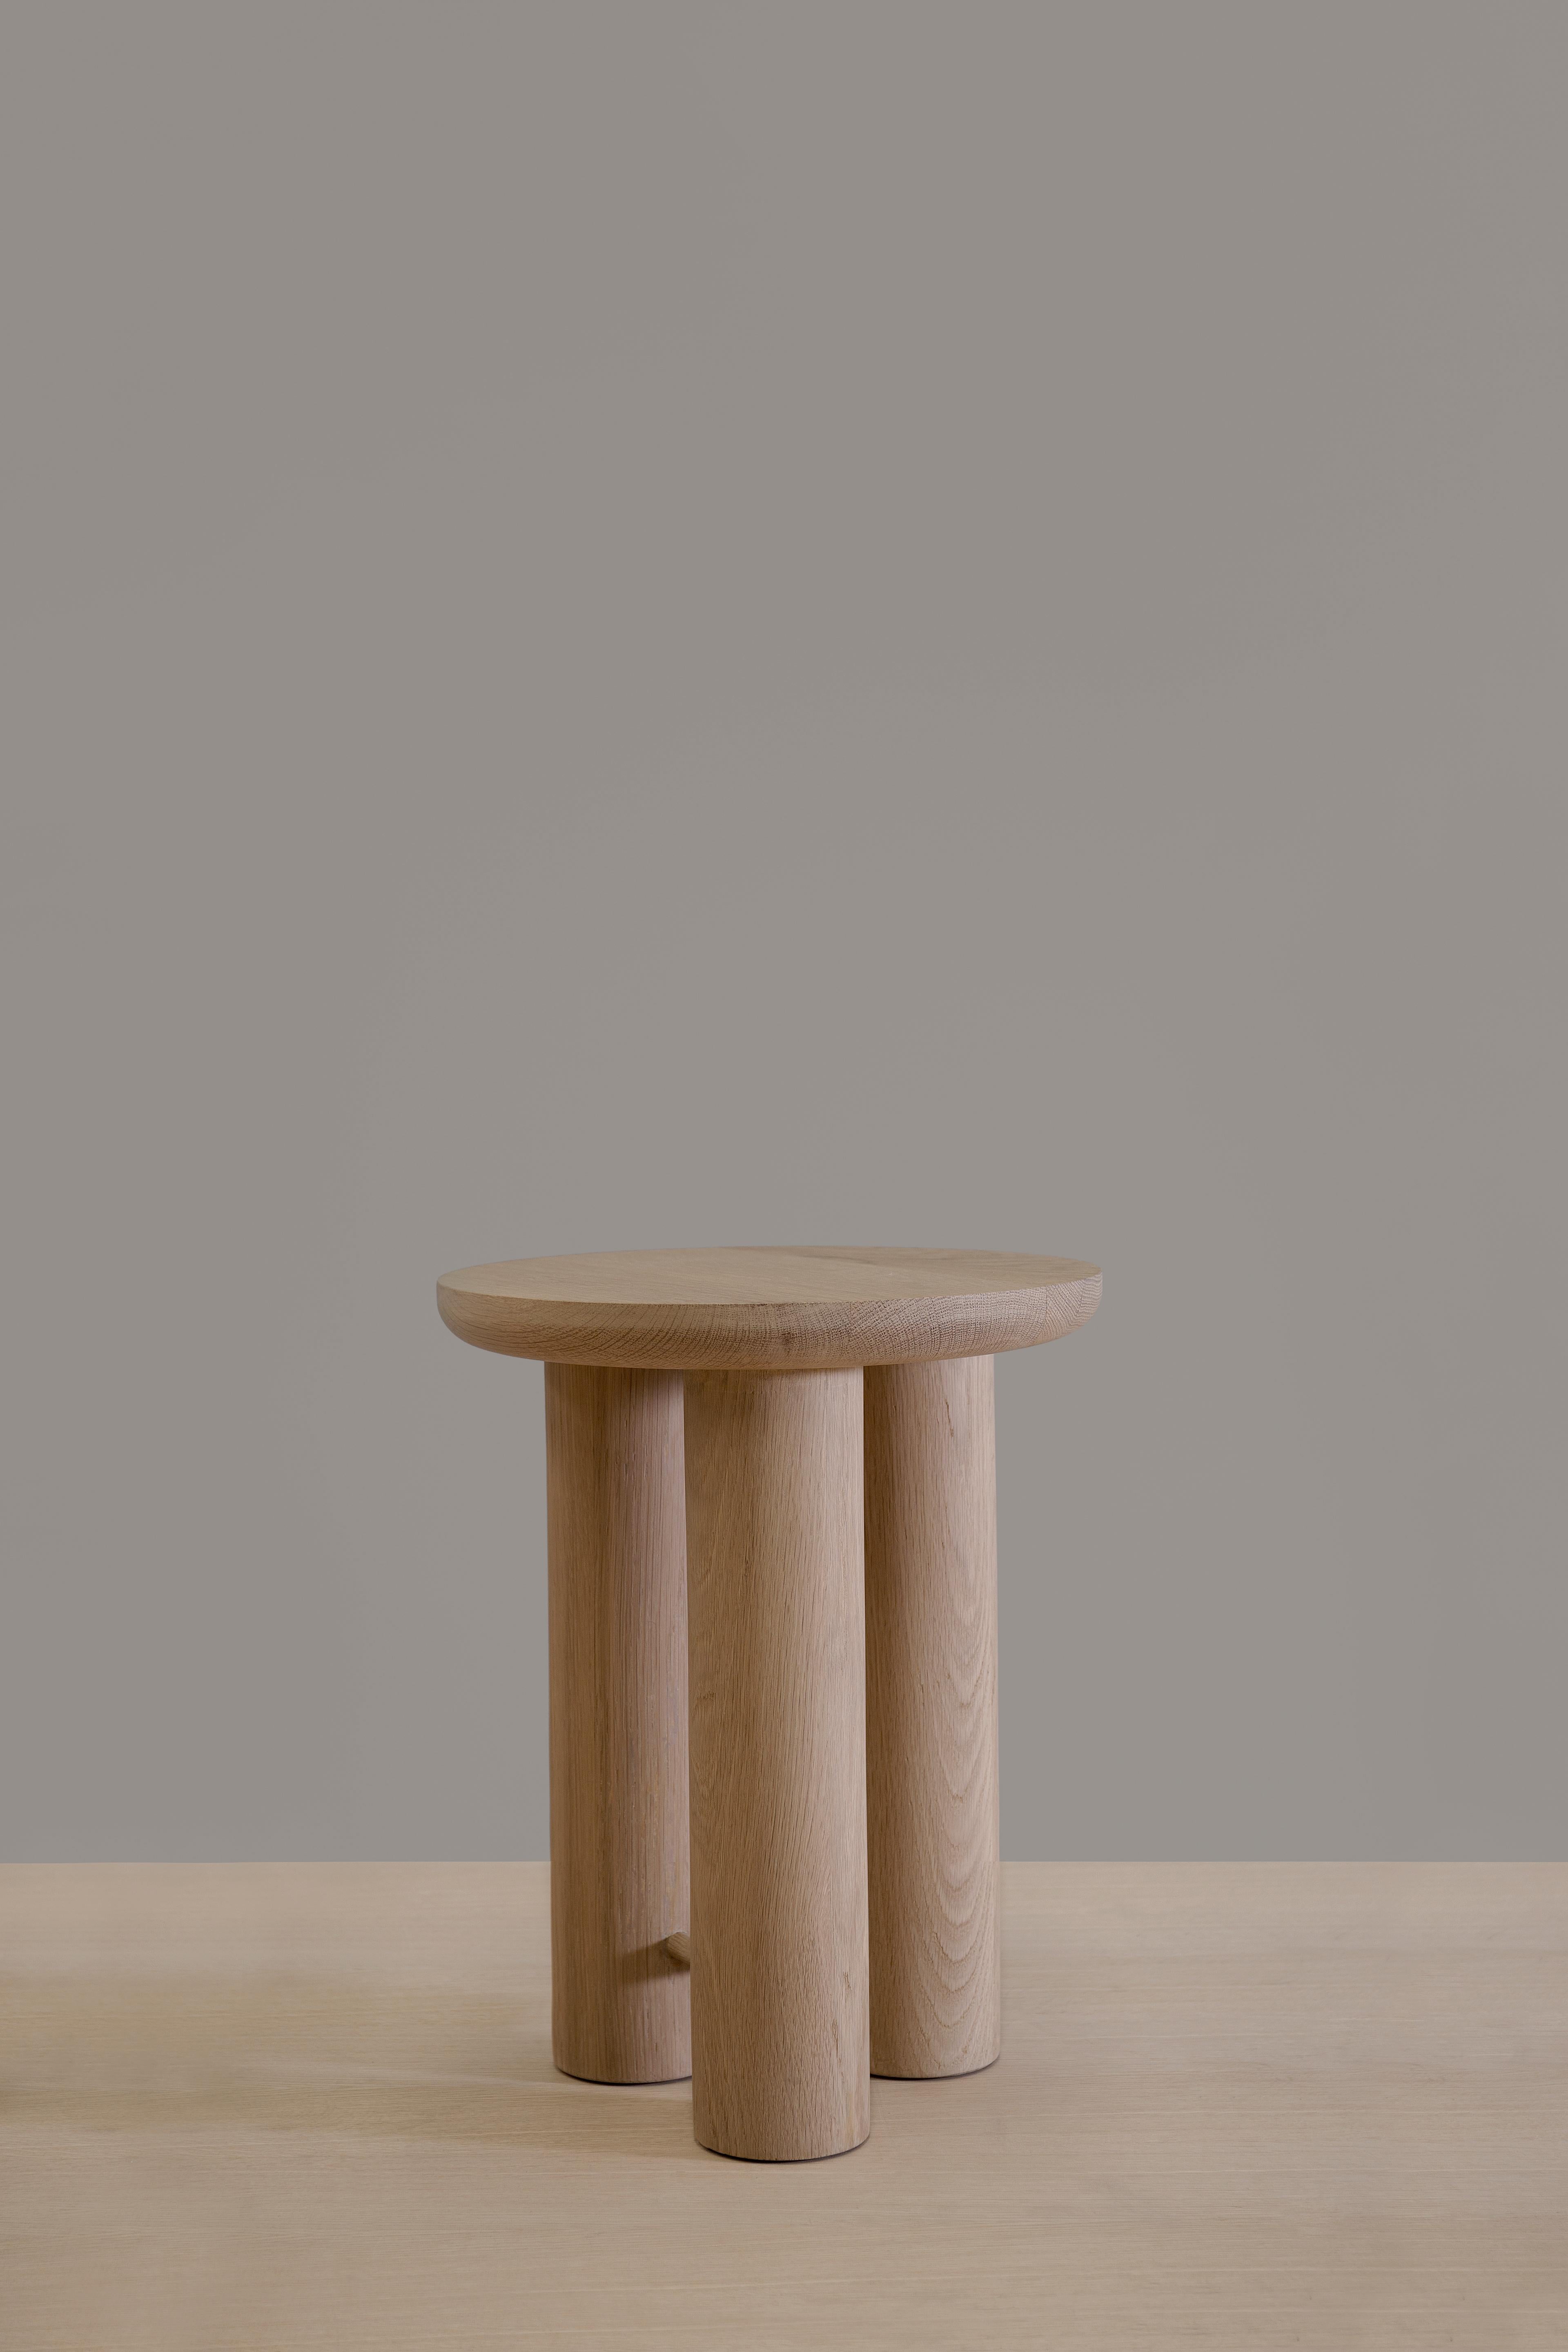 Antropología 02 is an oak stool and side table designed by Raul de la Cerda for BREUER ESTUDIO. This pies is part of Antropología Collection in which Raul collaborated with BREUER to create exceptional pieces. 

Raul de la Cerda is an